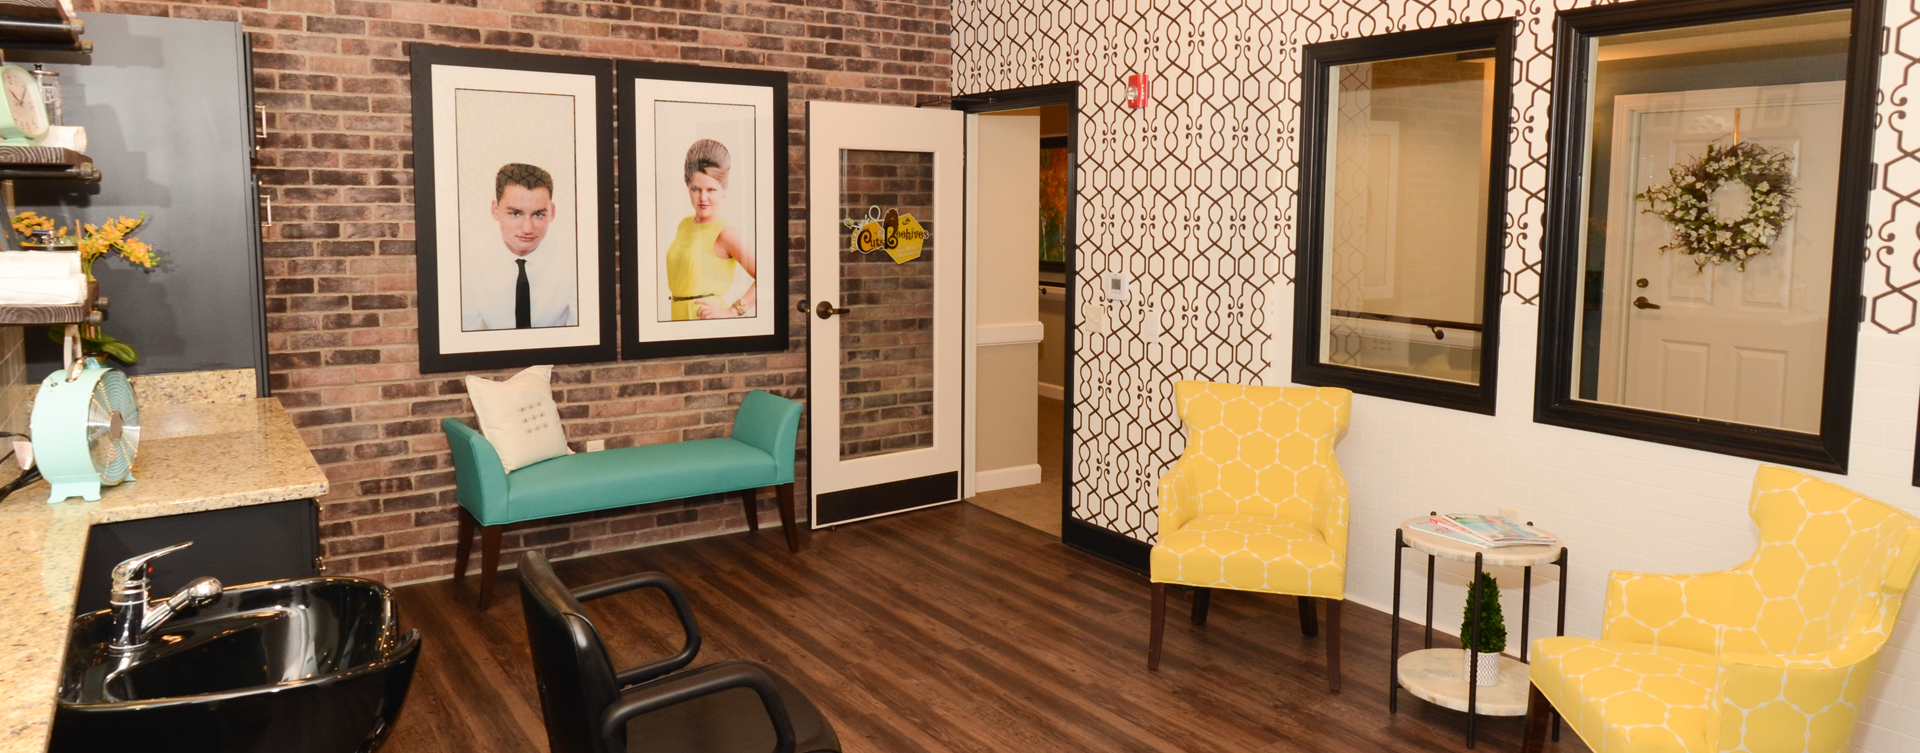 Receive personalized, at-home treatment from our stylist in the salon at Bickford of Gurnee